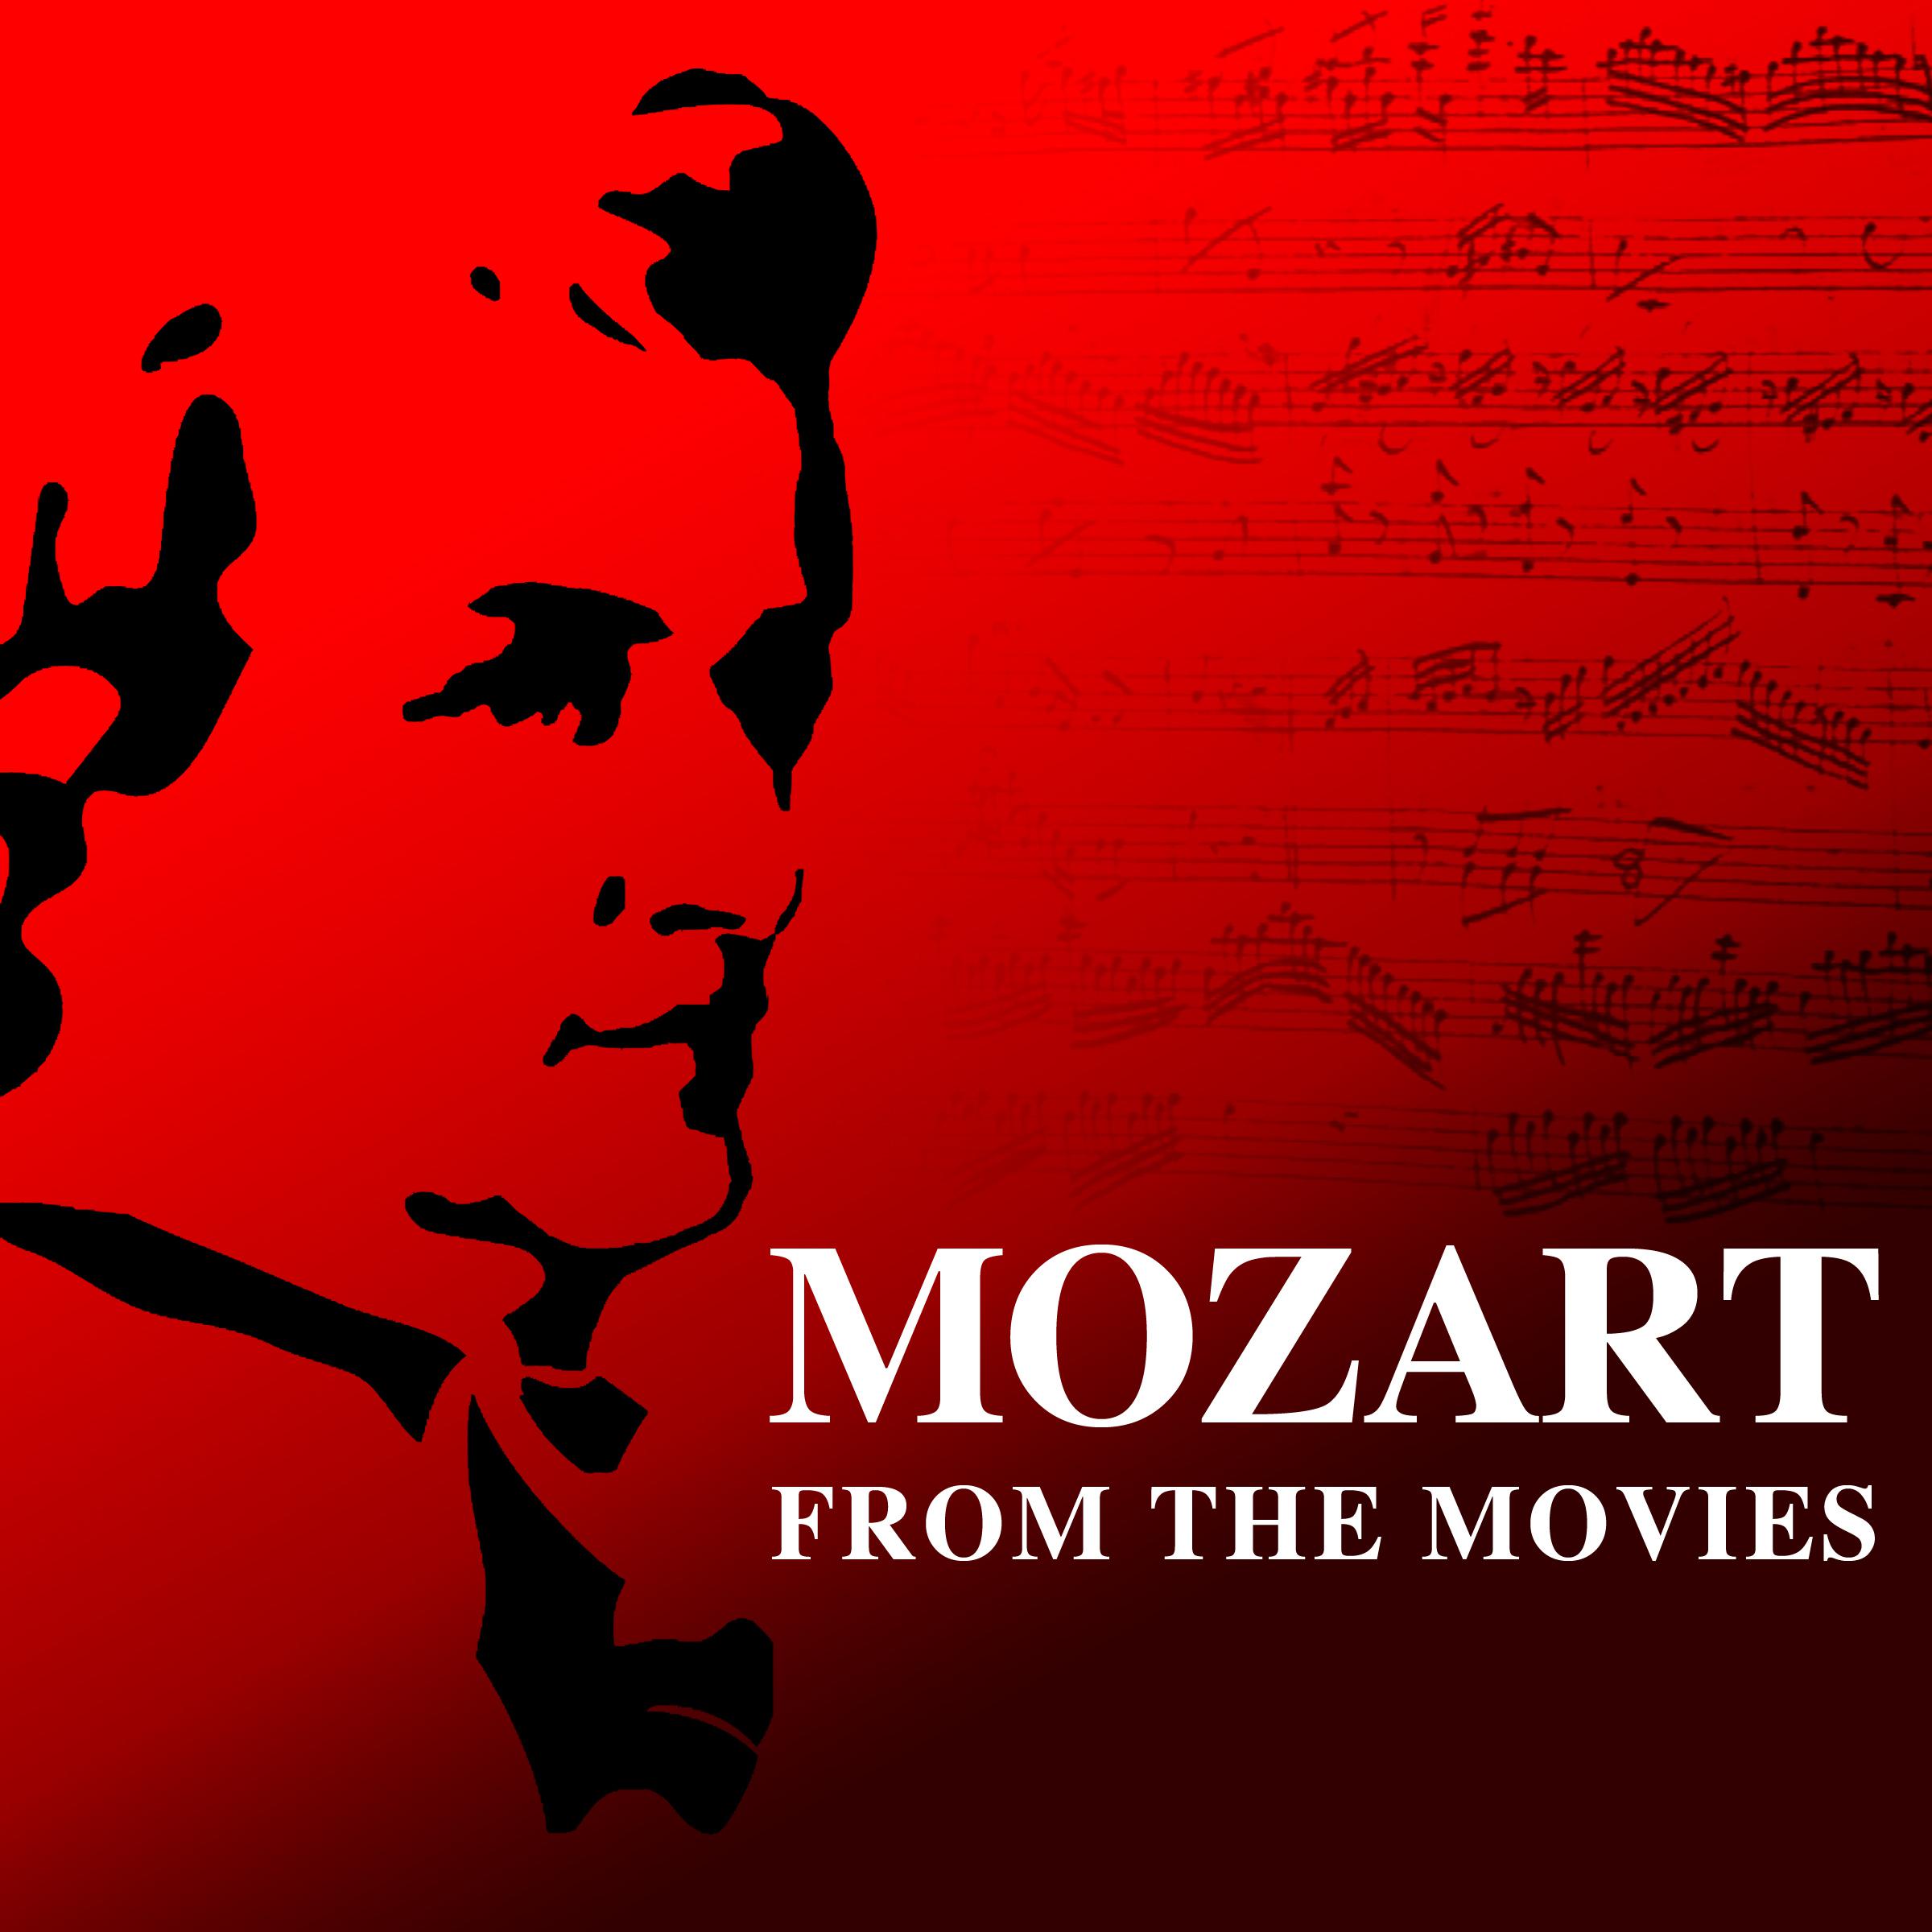 Mozart from the Movies